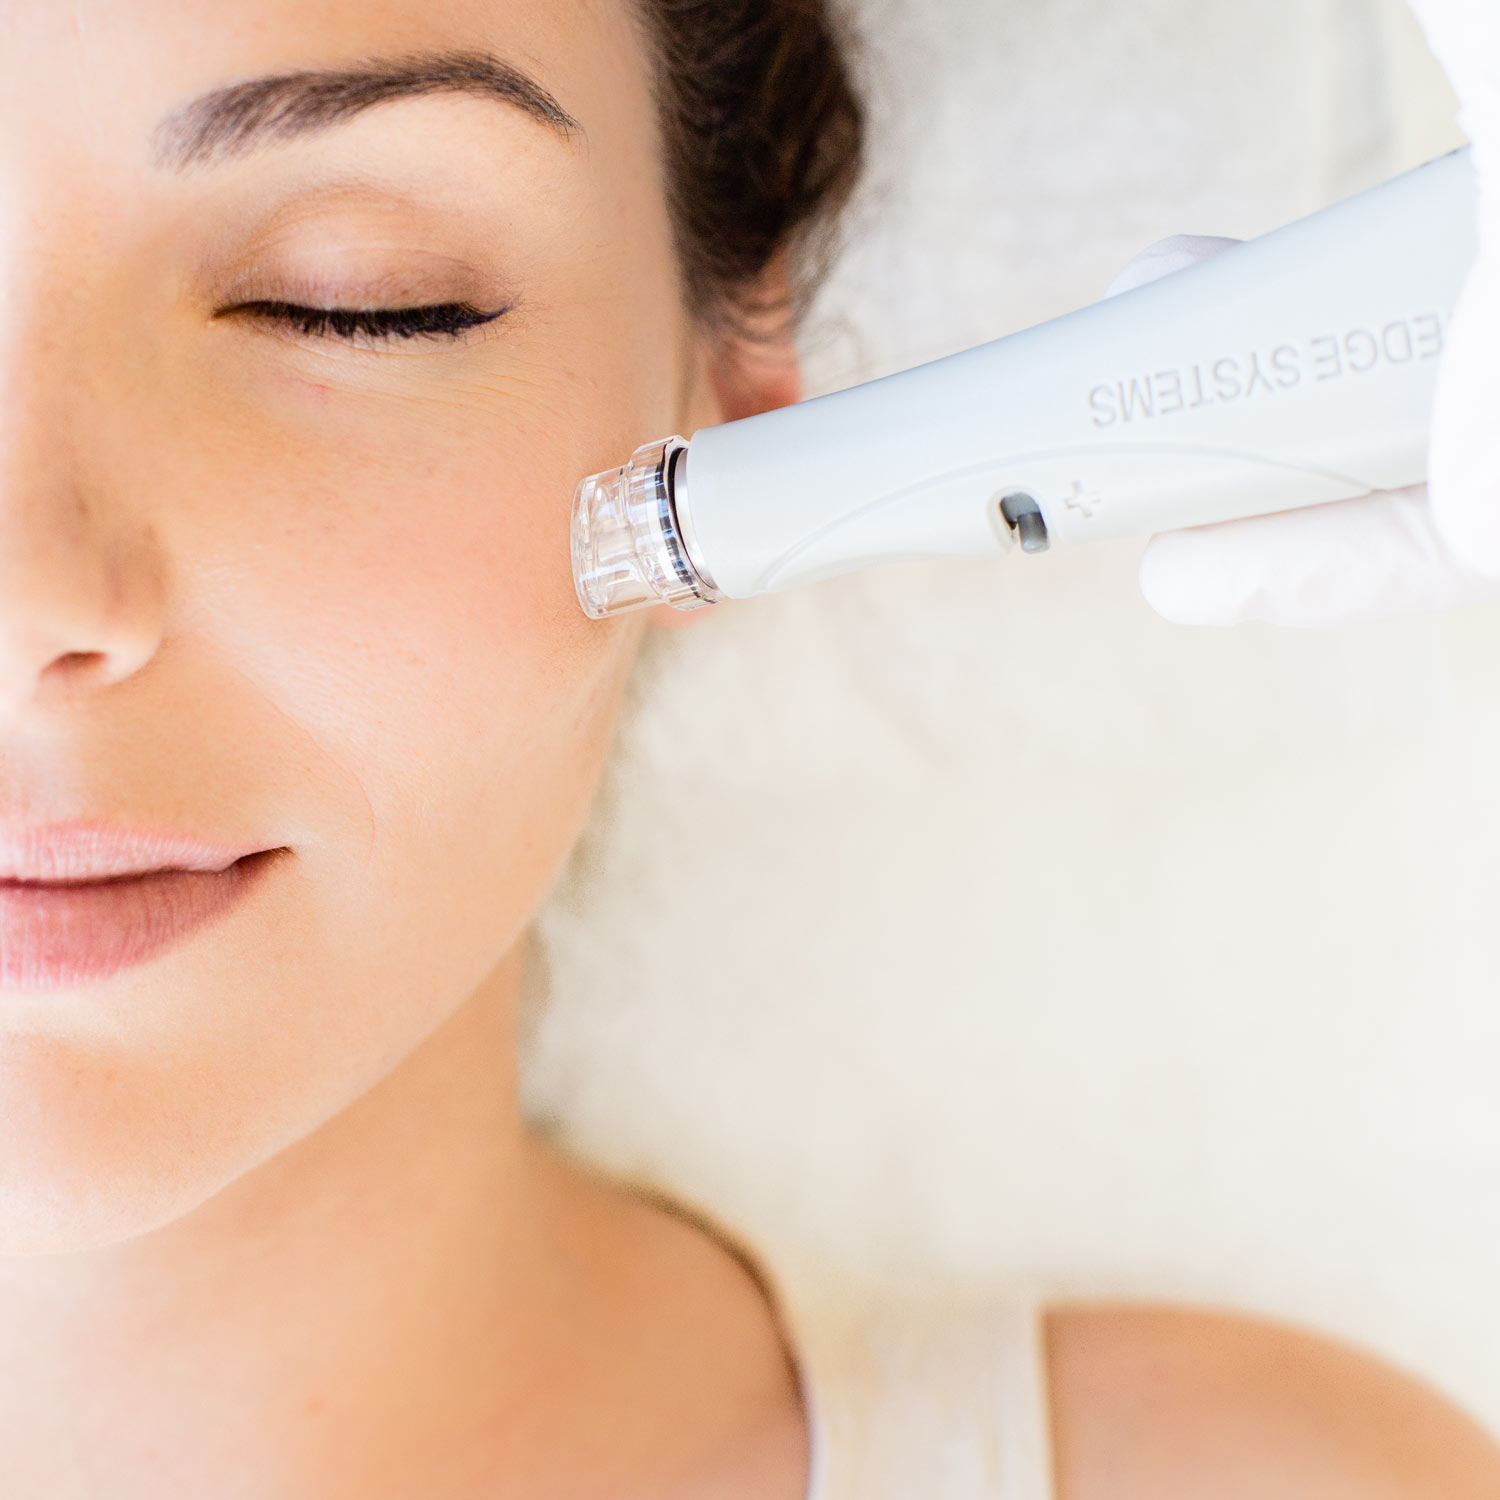 Images of Hydrafacial treatment on skin